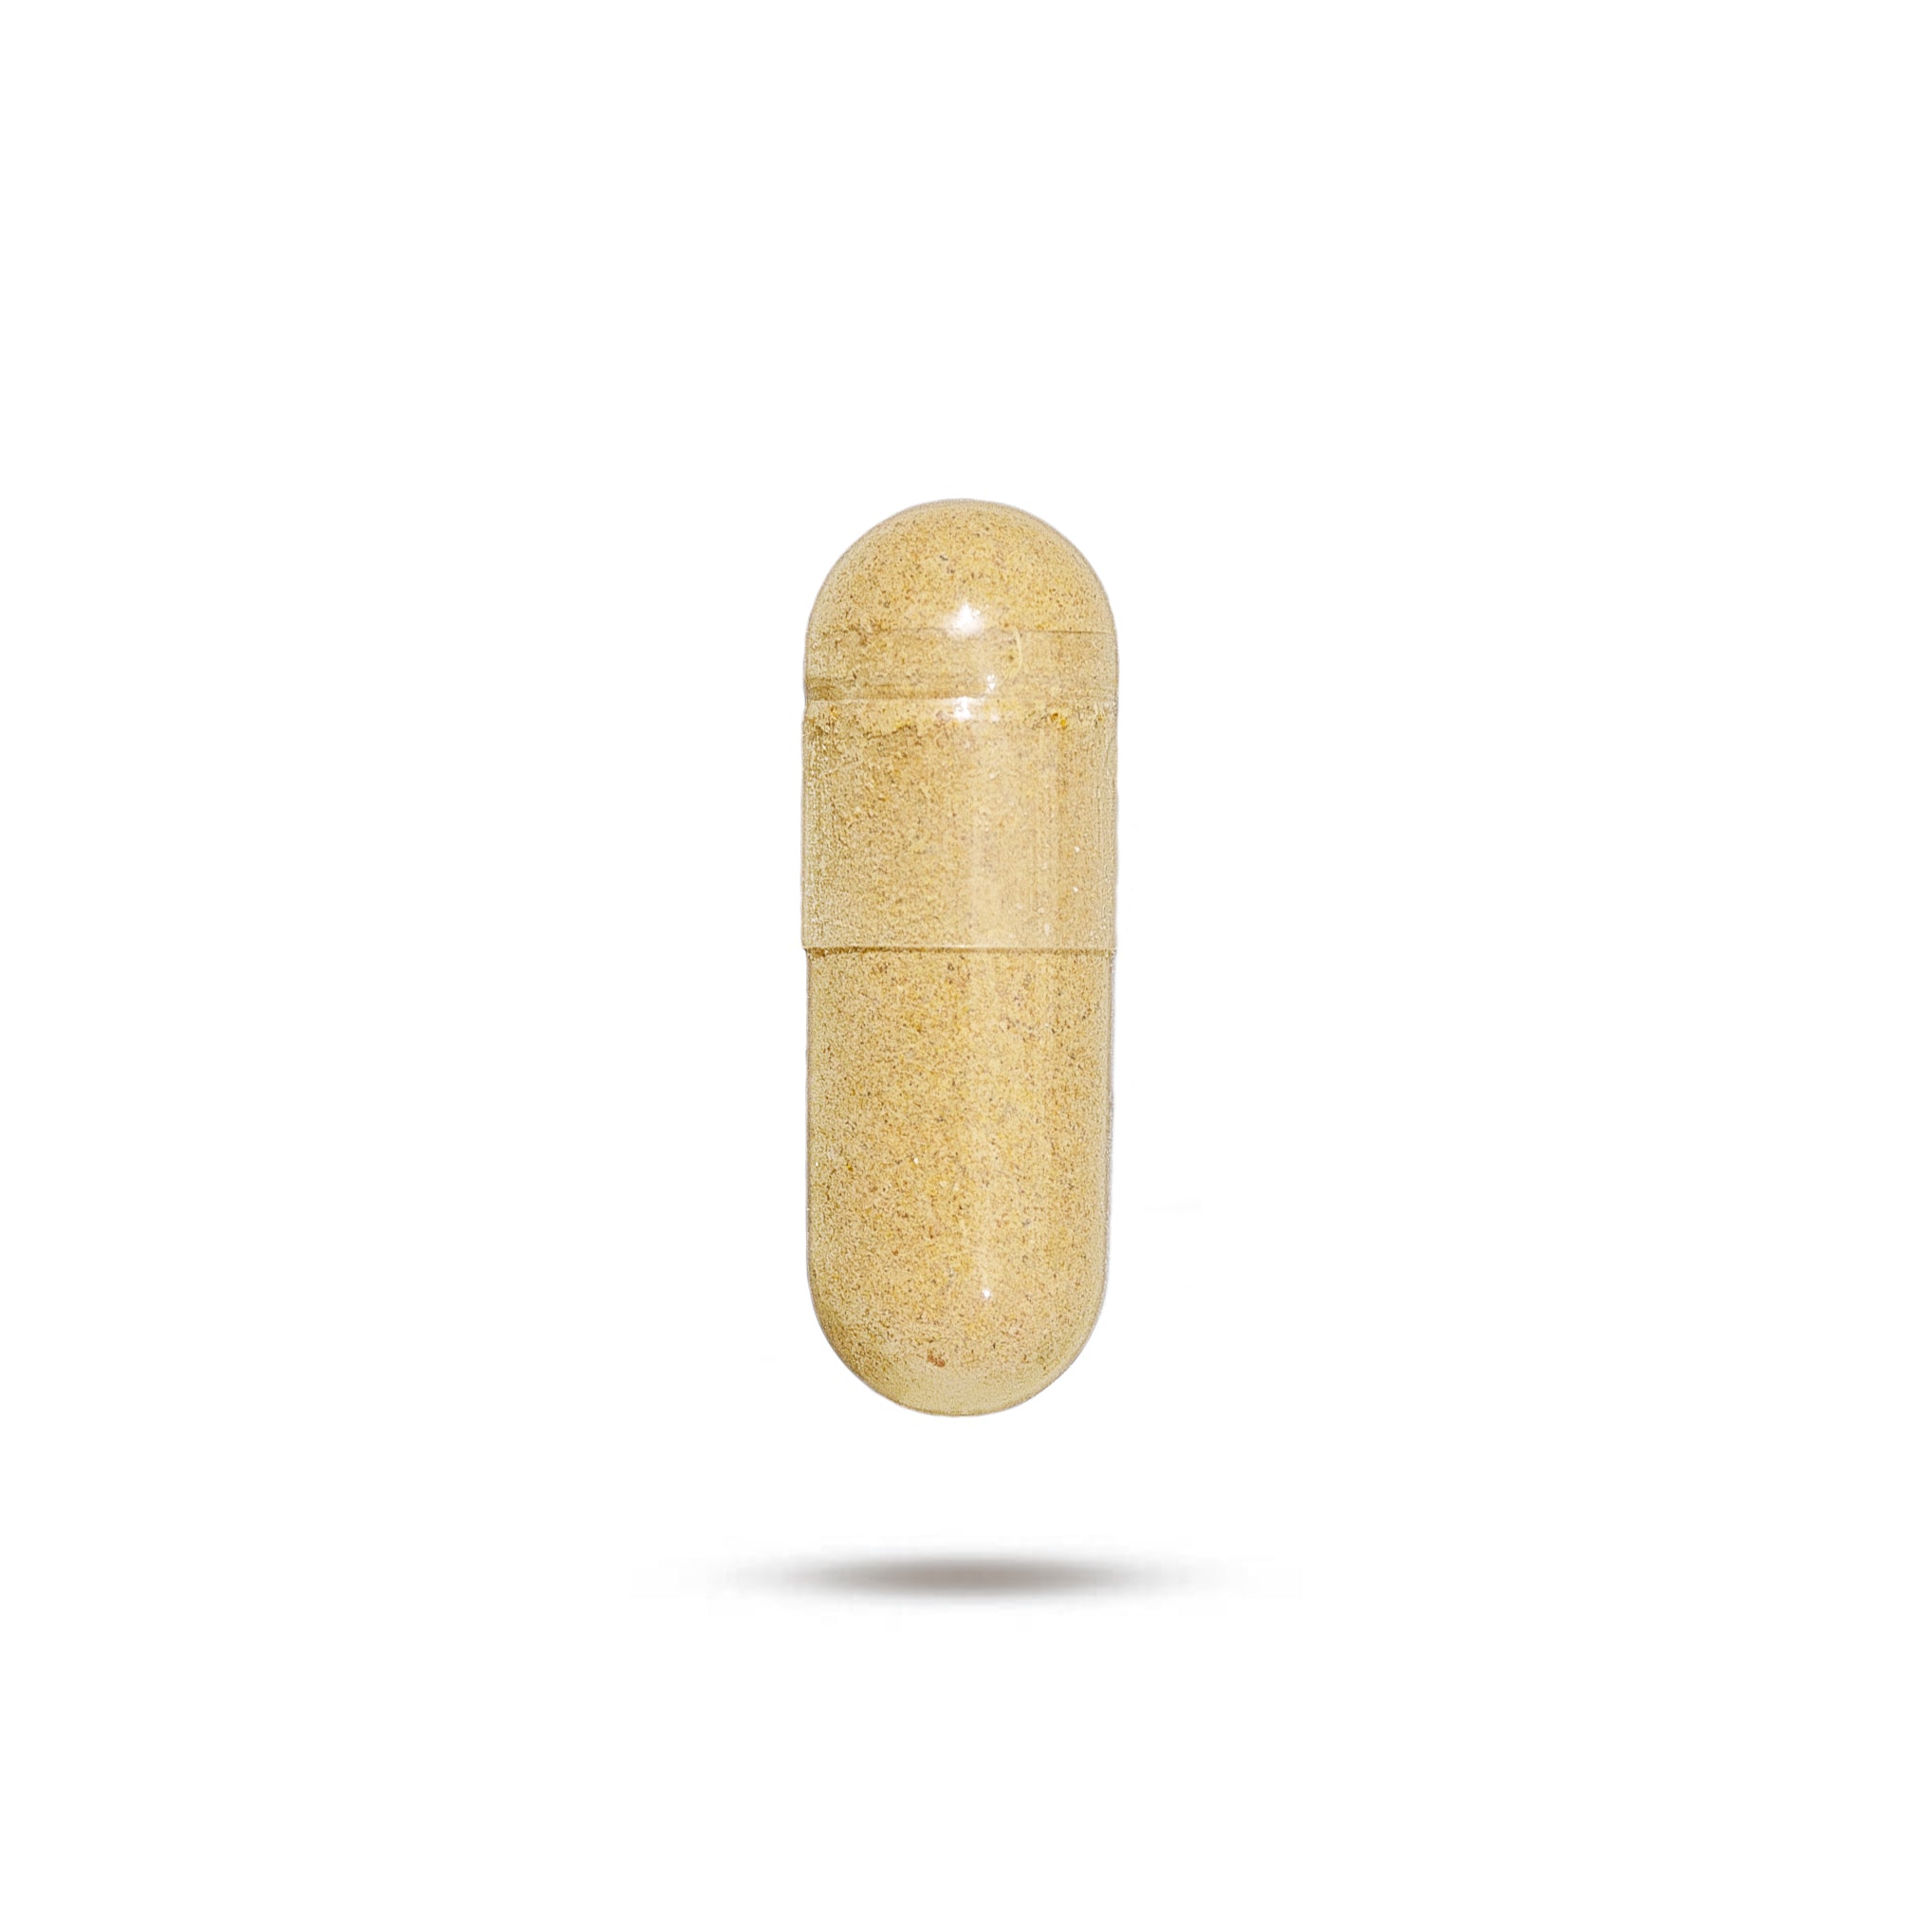 Picture of single capsule of Male Drive vitamin by Heal Quick